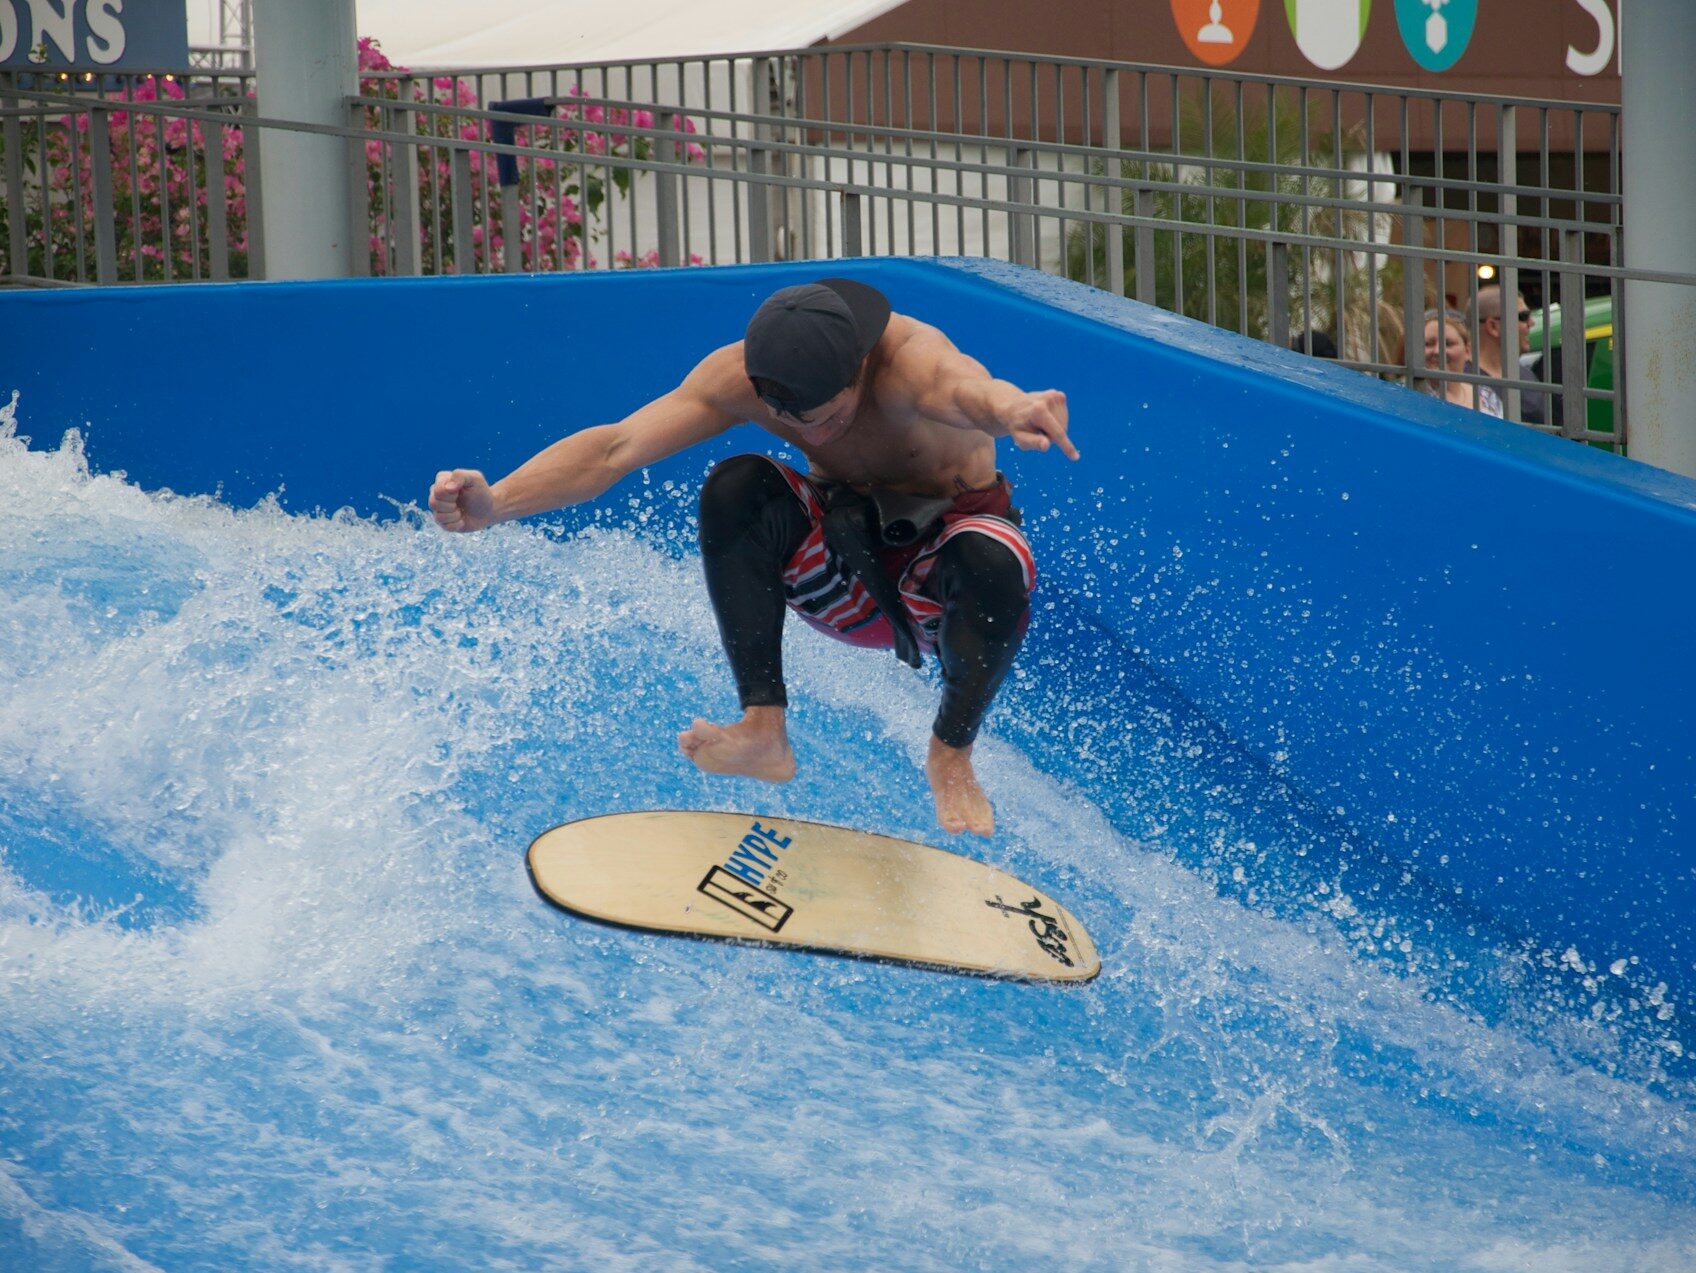 Surfer in Midair at the State Fair of Texas, Exposition Avenue, Dallas, TX.